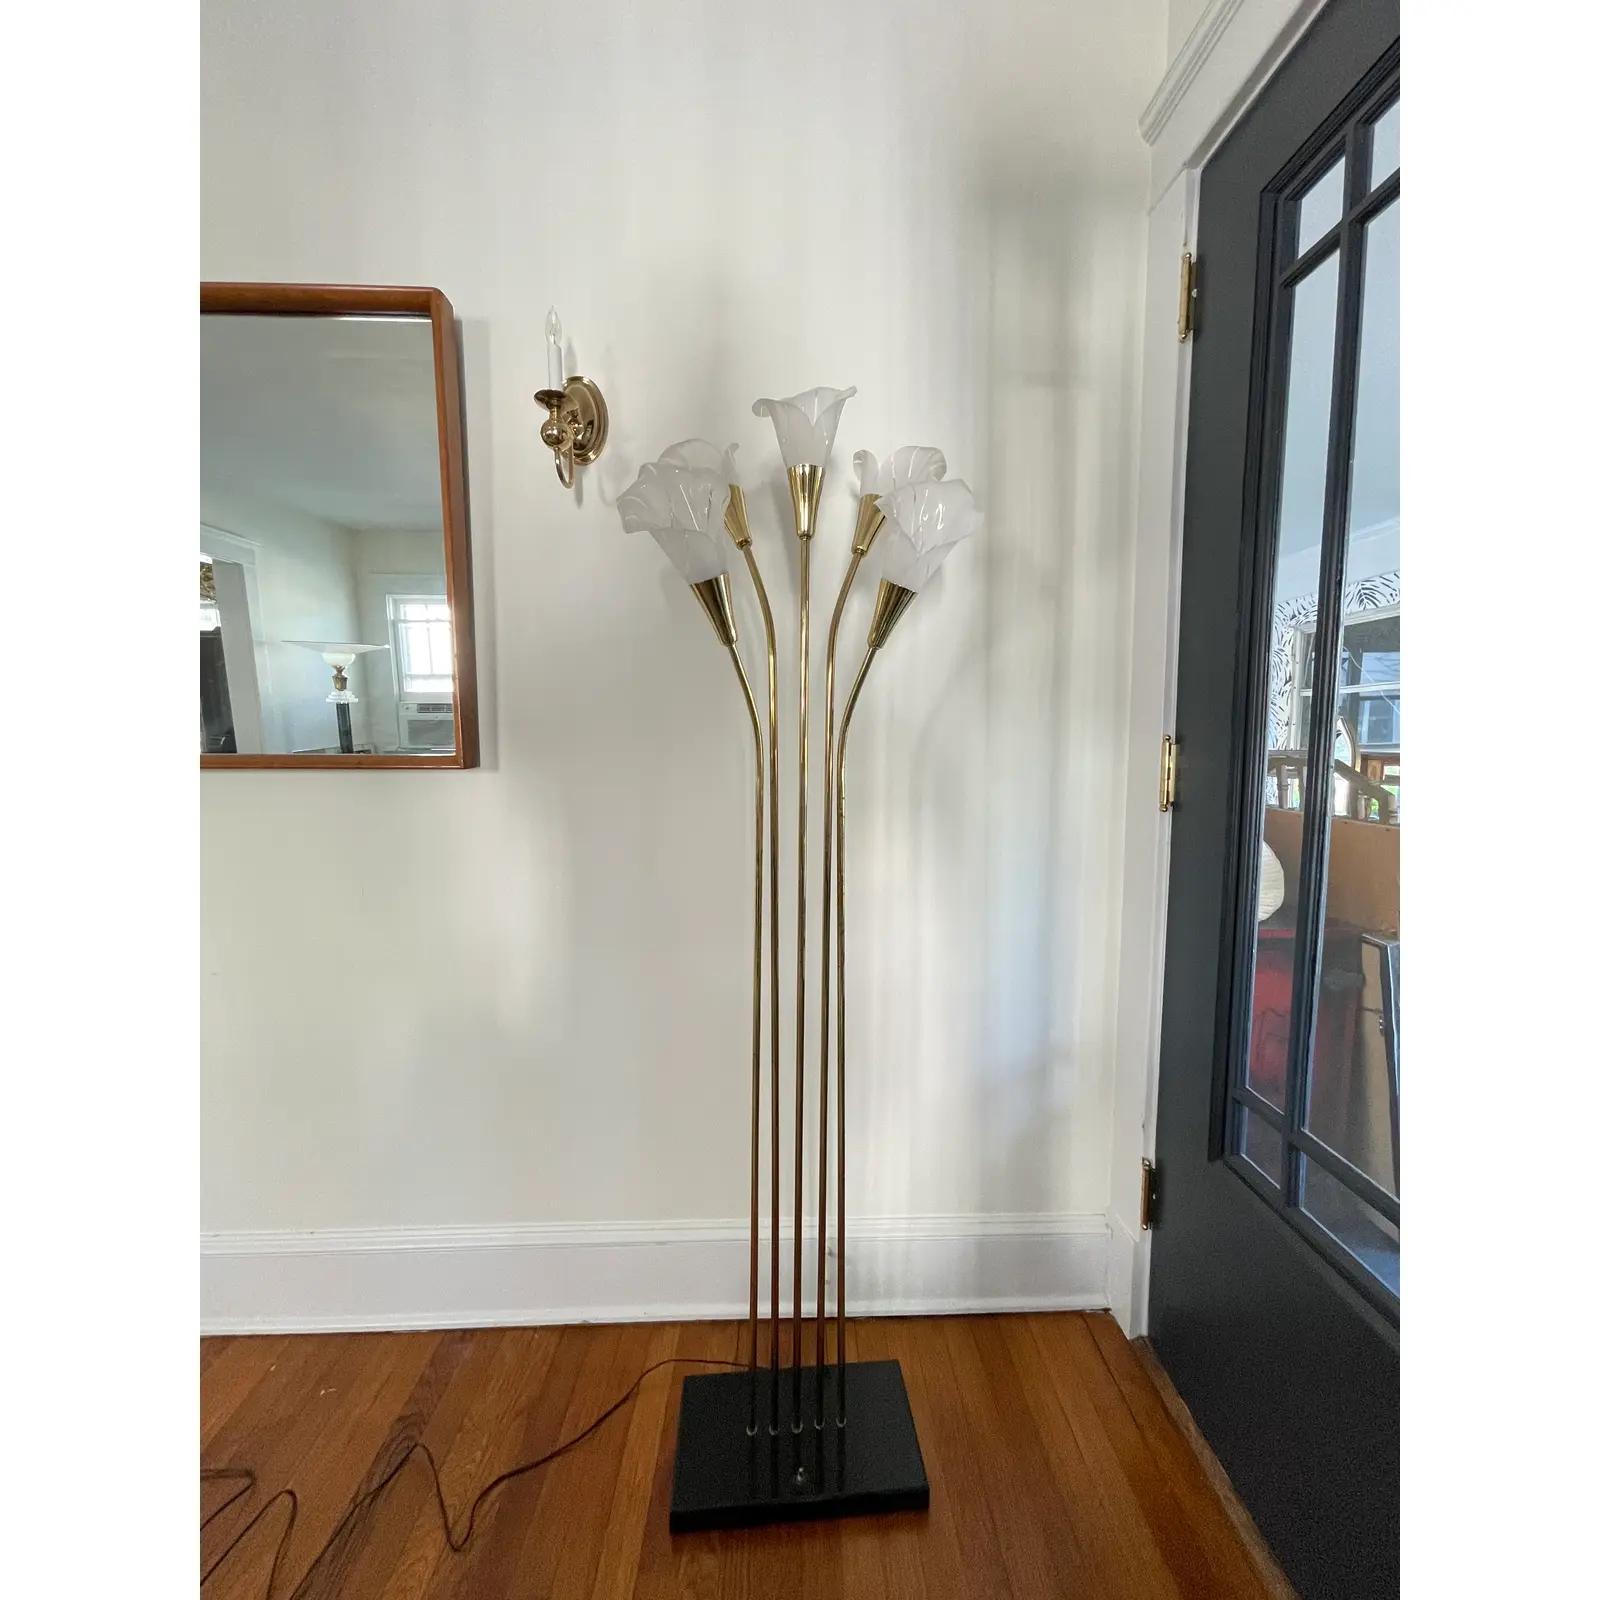 Unique Calla Lily Floor Lamp. 5 arm. Brass. 3 way to control mood lighting. Acrylic shades with brass stems.
Curbside to NYC/Philly $400